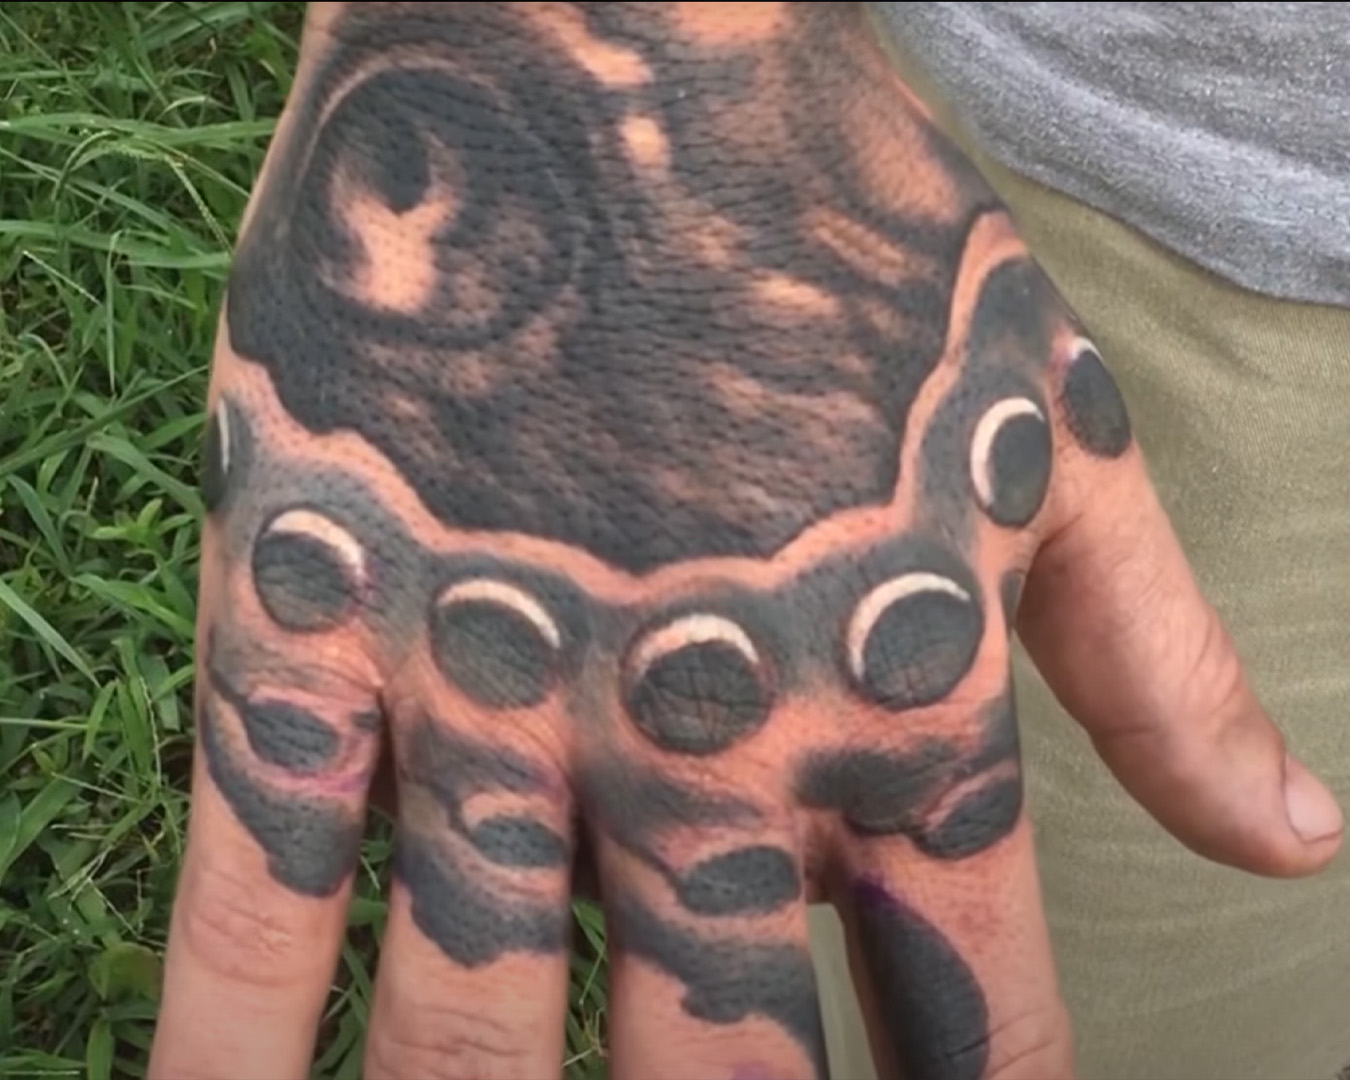 final image with complete hand tattoo of an octopus